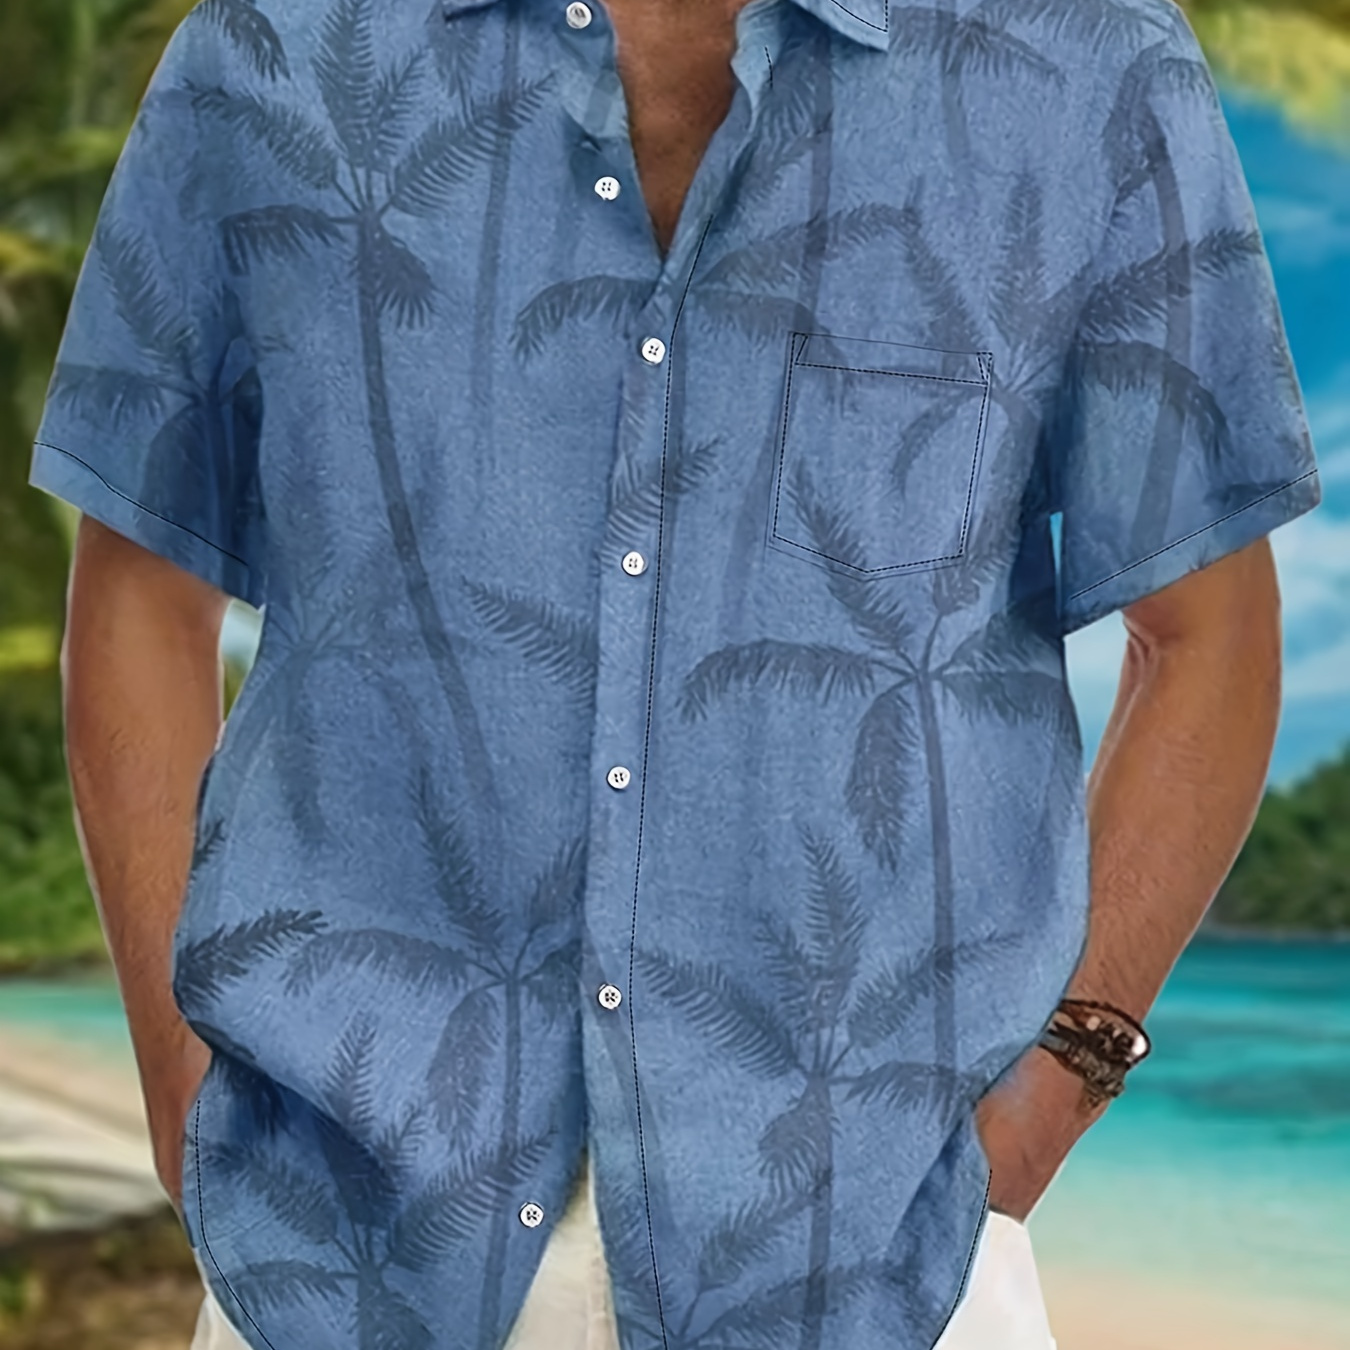 

Plus Size Men's Coconut Trees Graphic Print Shirt, Stylistic Lapel Shirt For Beach Vacation, Hawaiian Shirt For Males